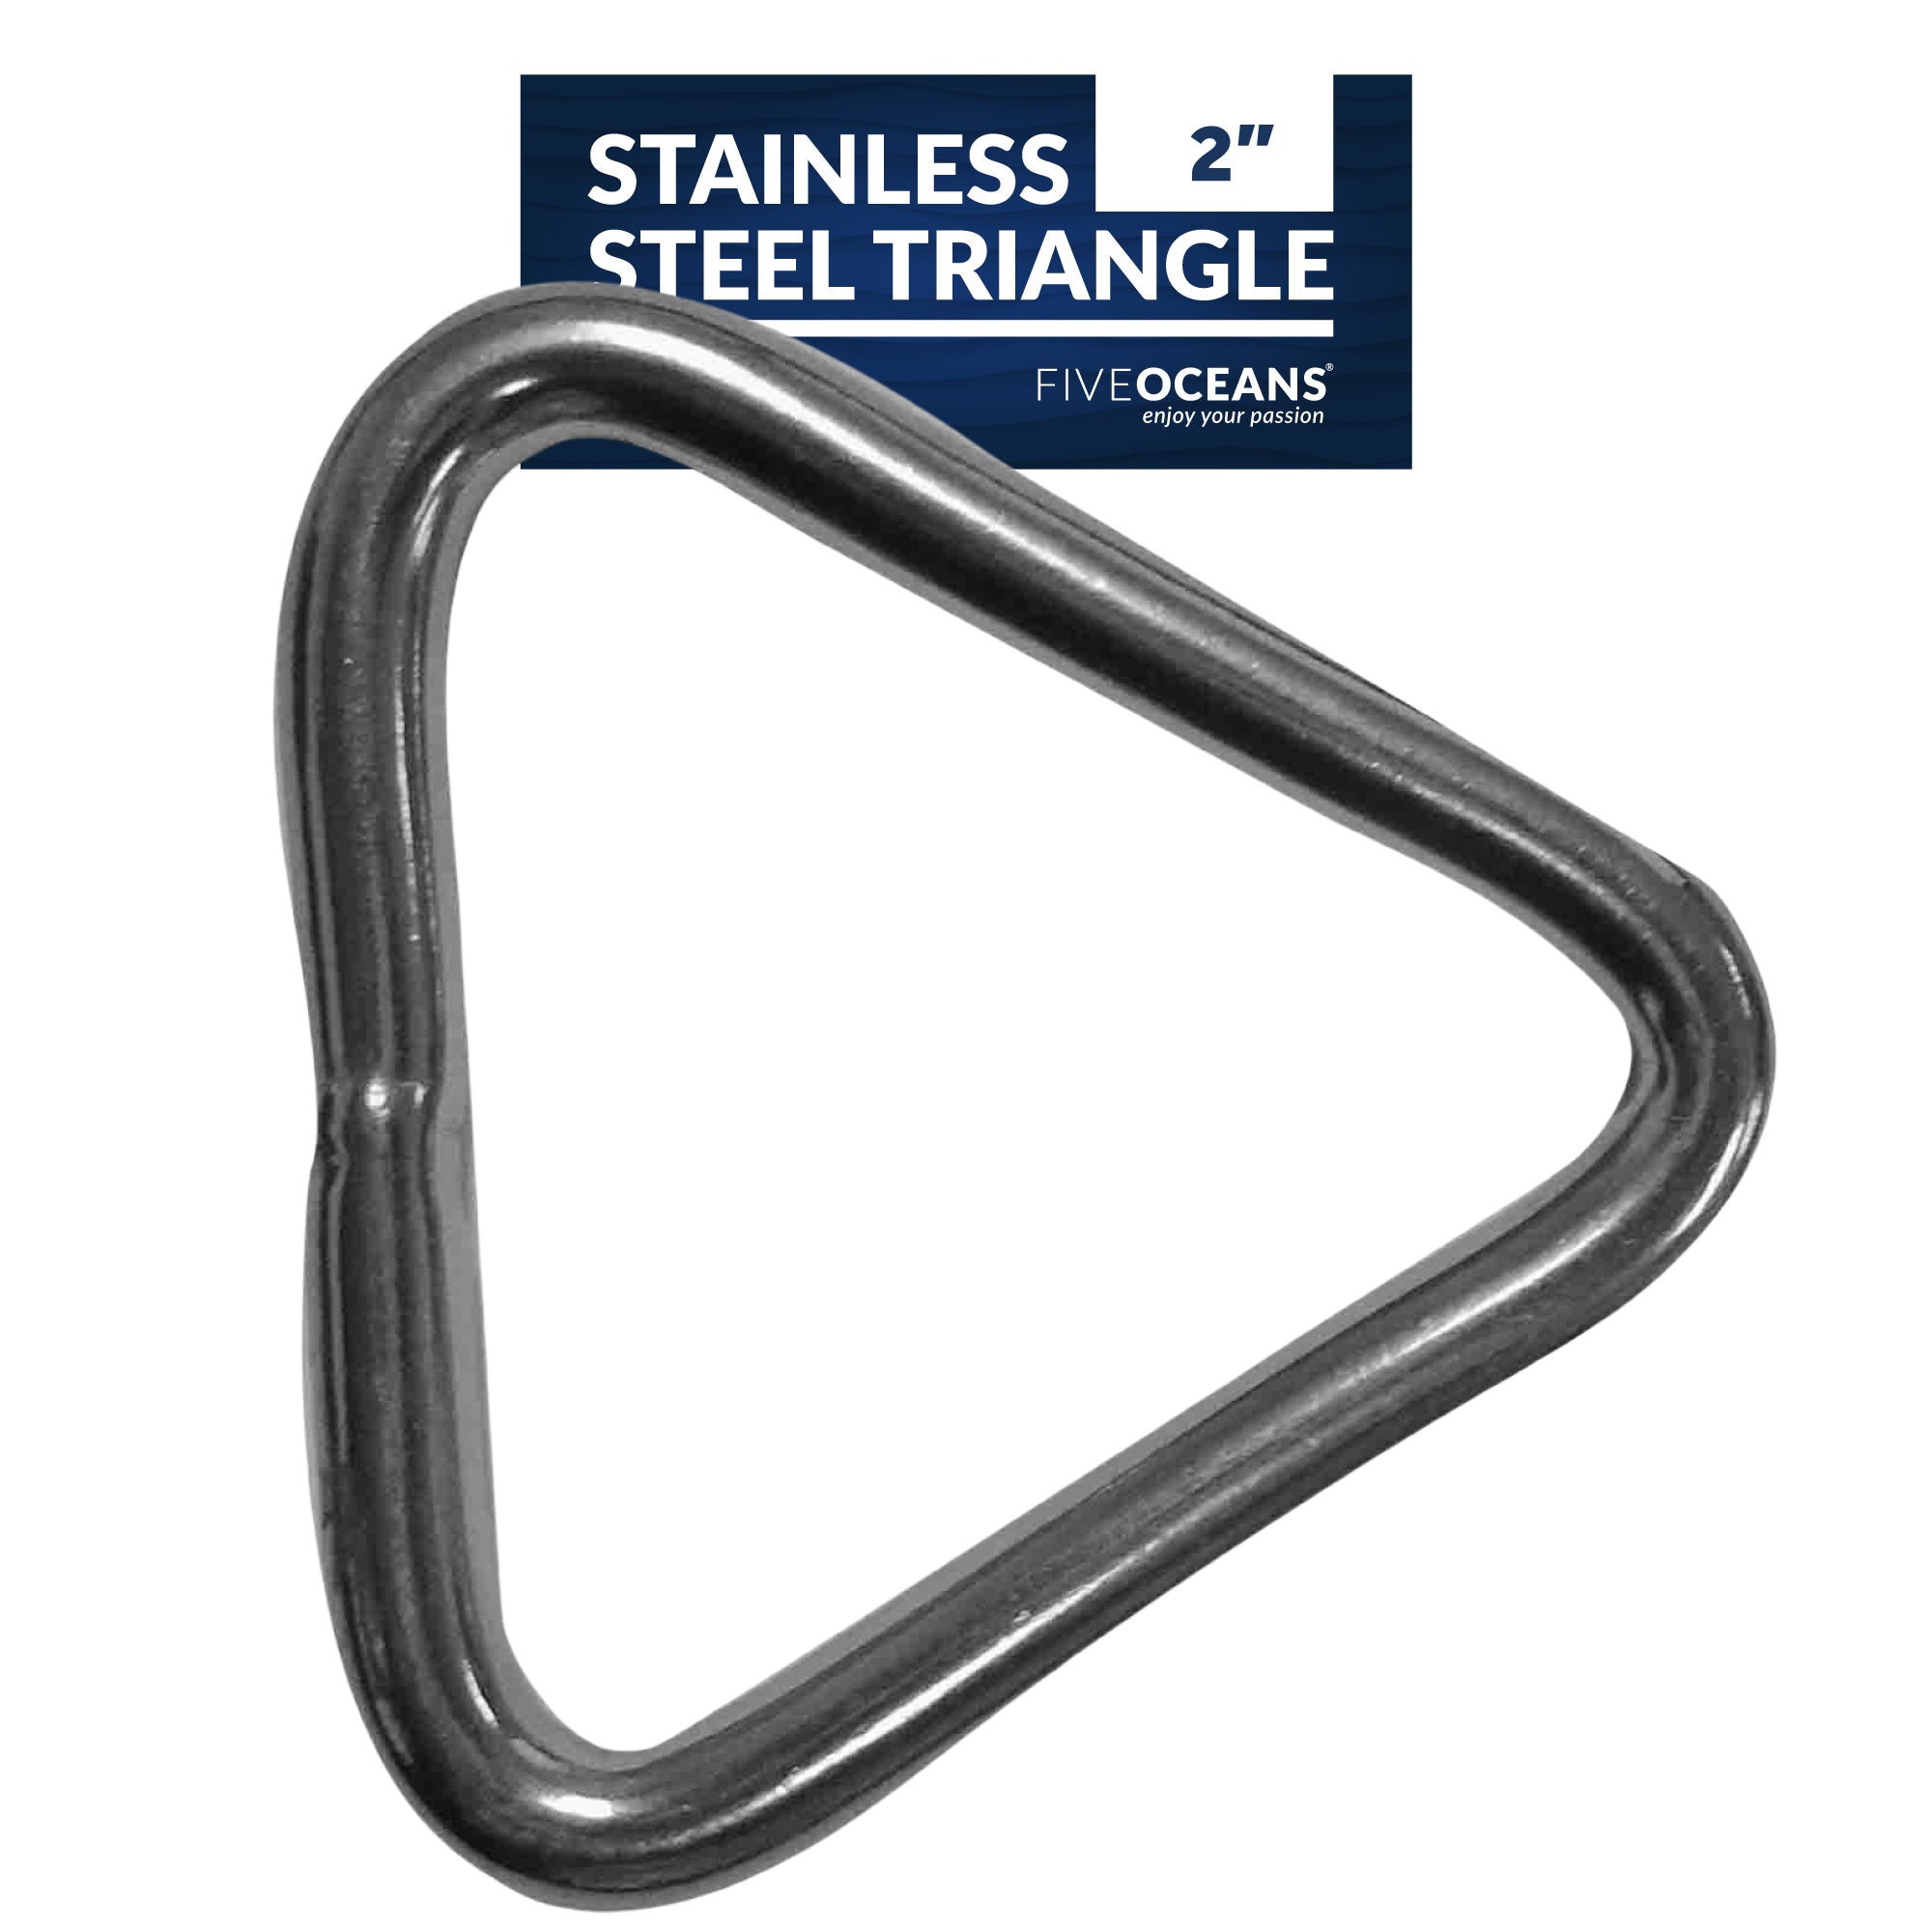 Stainless Steel Triangle, 1/4" x 2" - FO3808